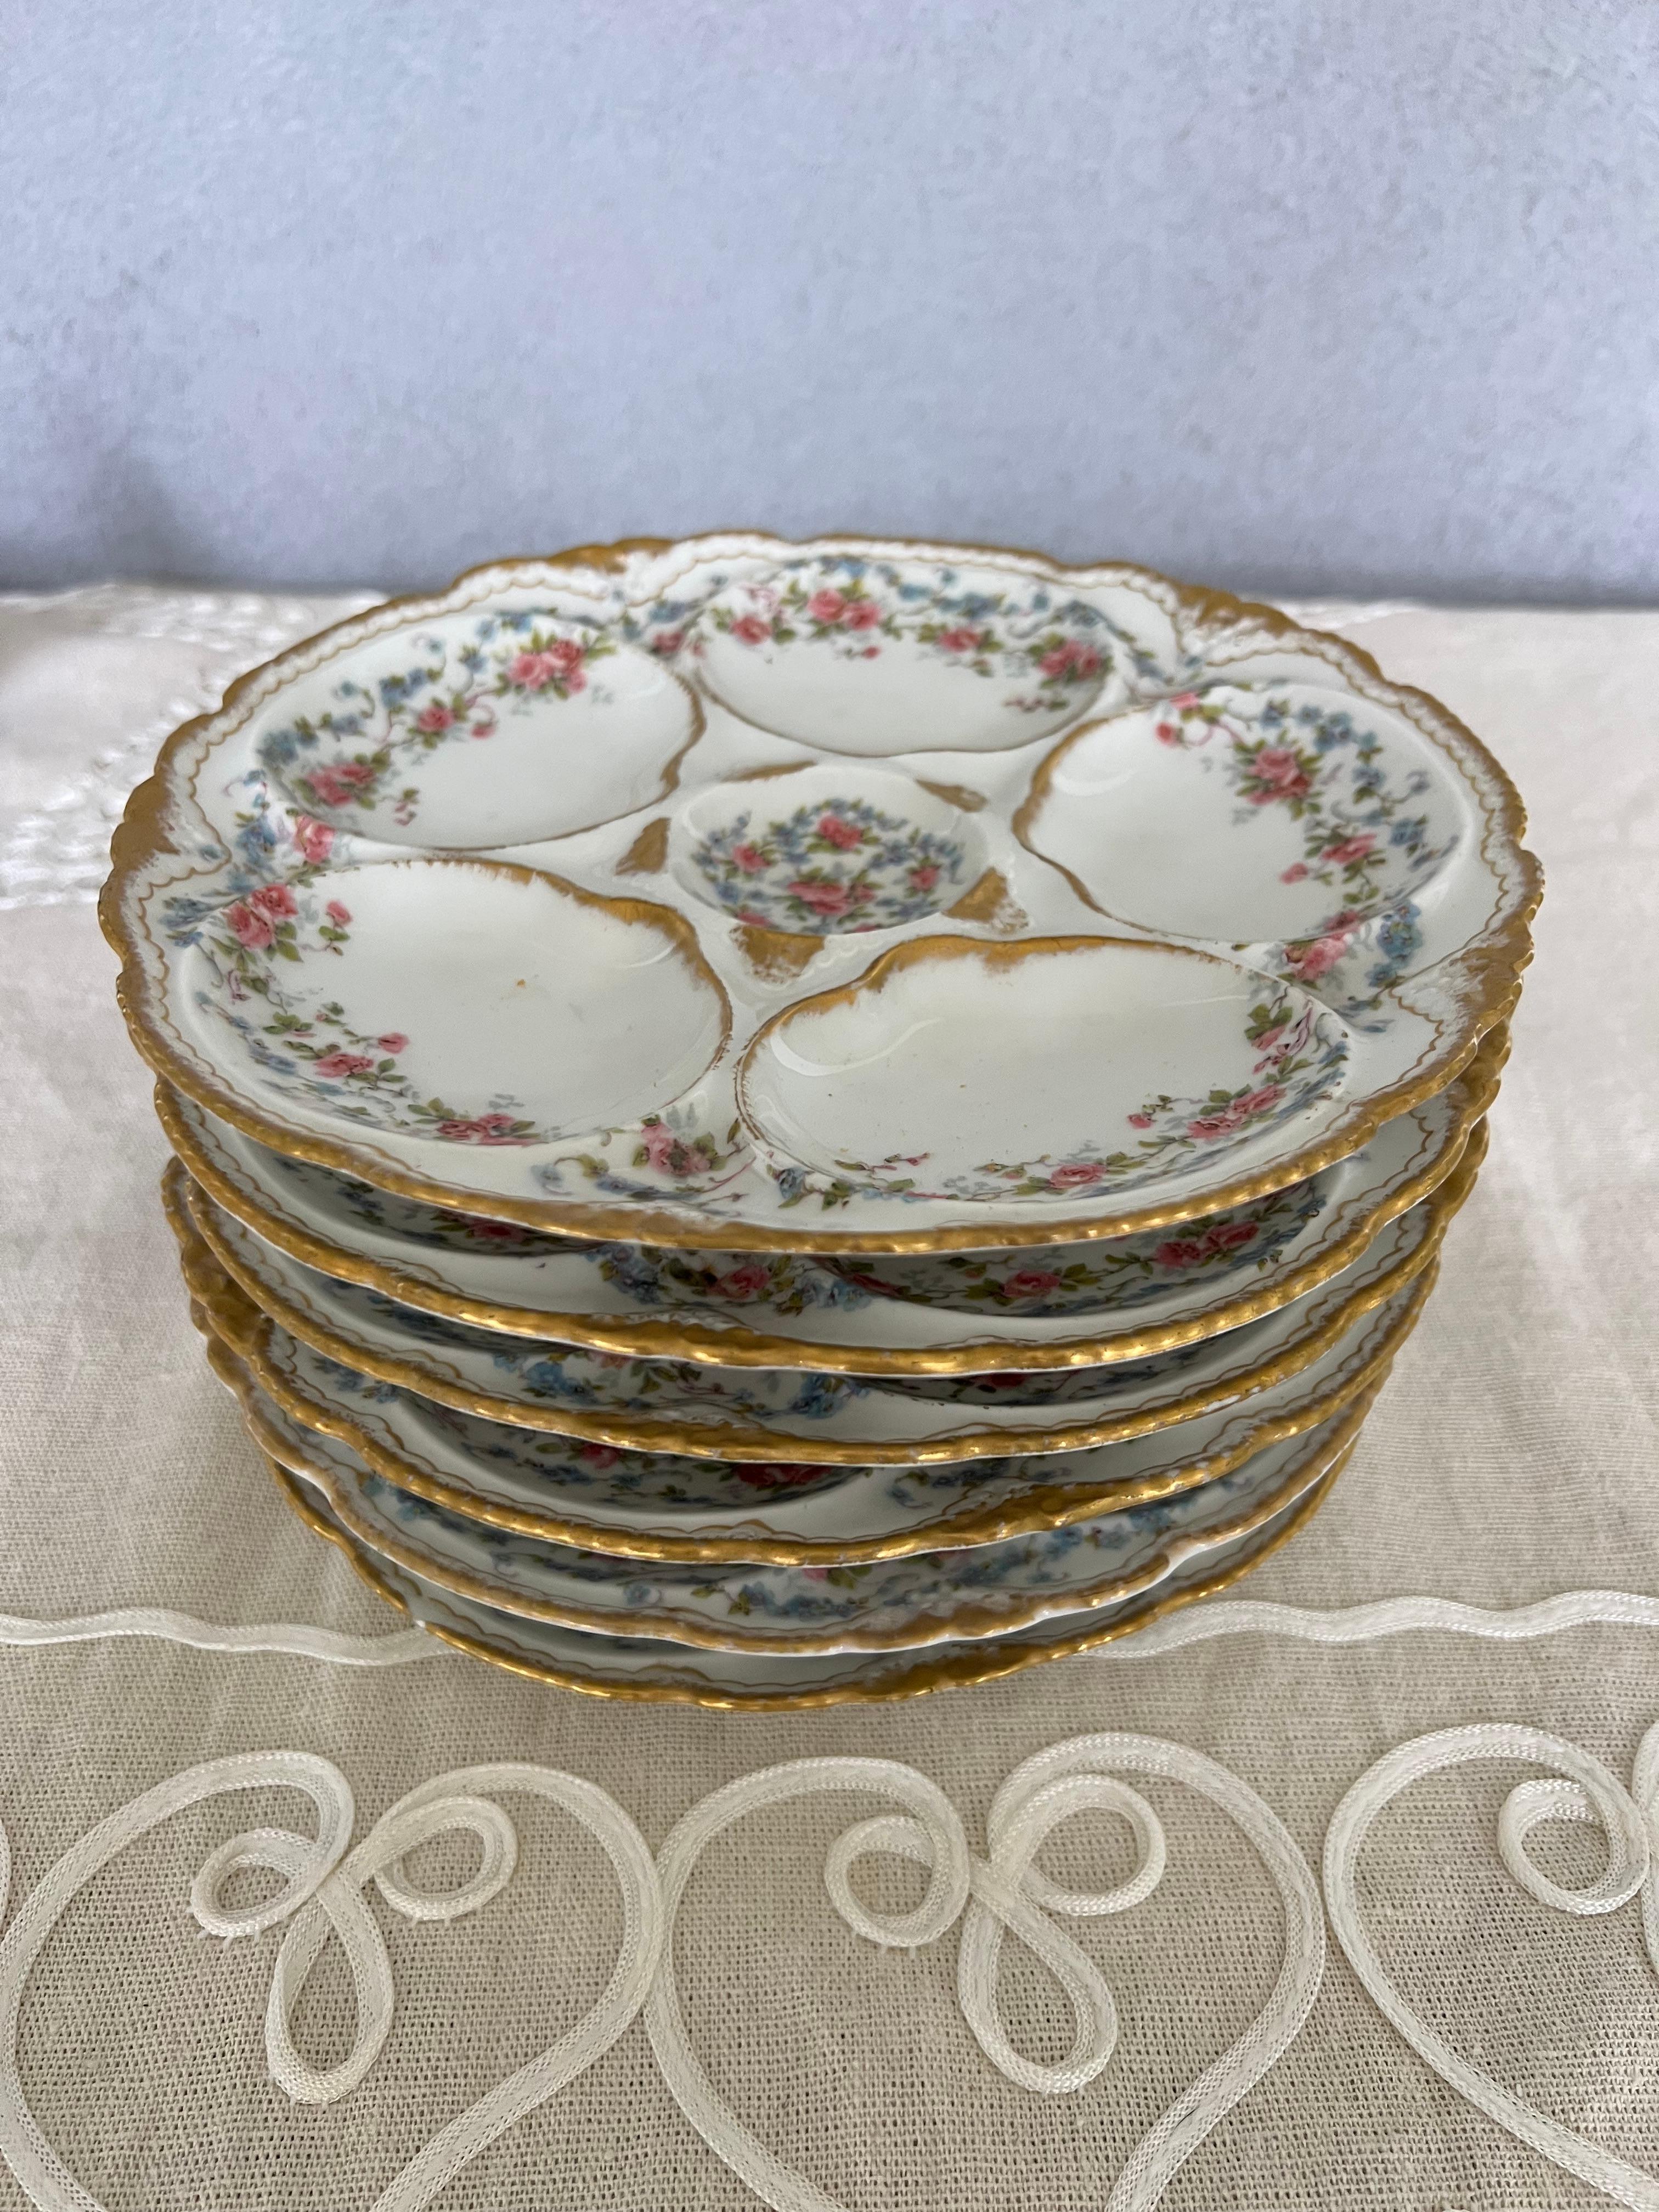 Stunning Set of 6 Fine Antique Seth Hopkins Signed Theodore Haviland Limoges France Oyster Plates
Could  be use for a plate wall or for your dinner table! Stunning and delicate design with gold accents 
